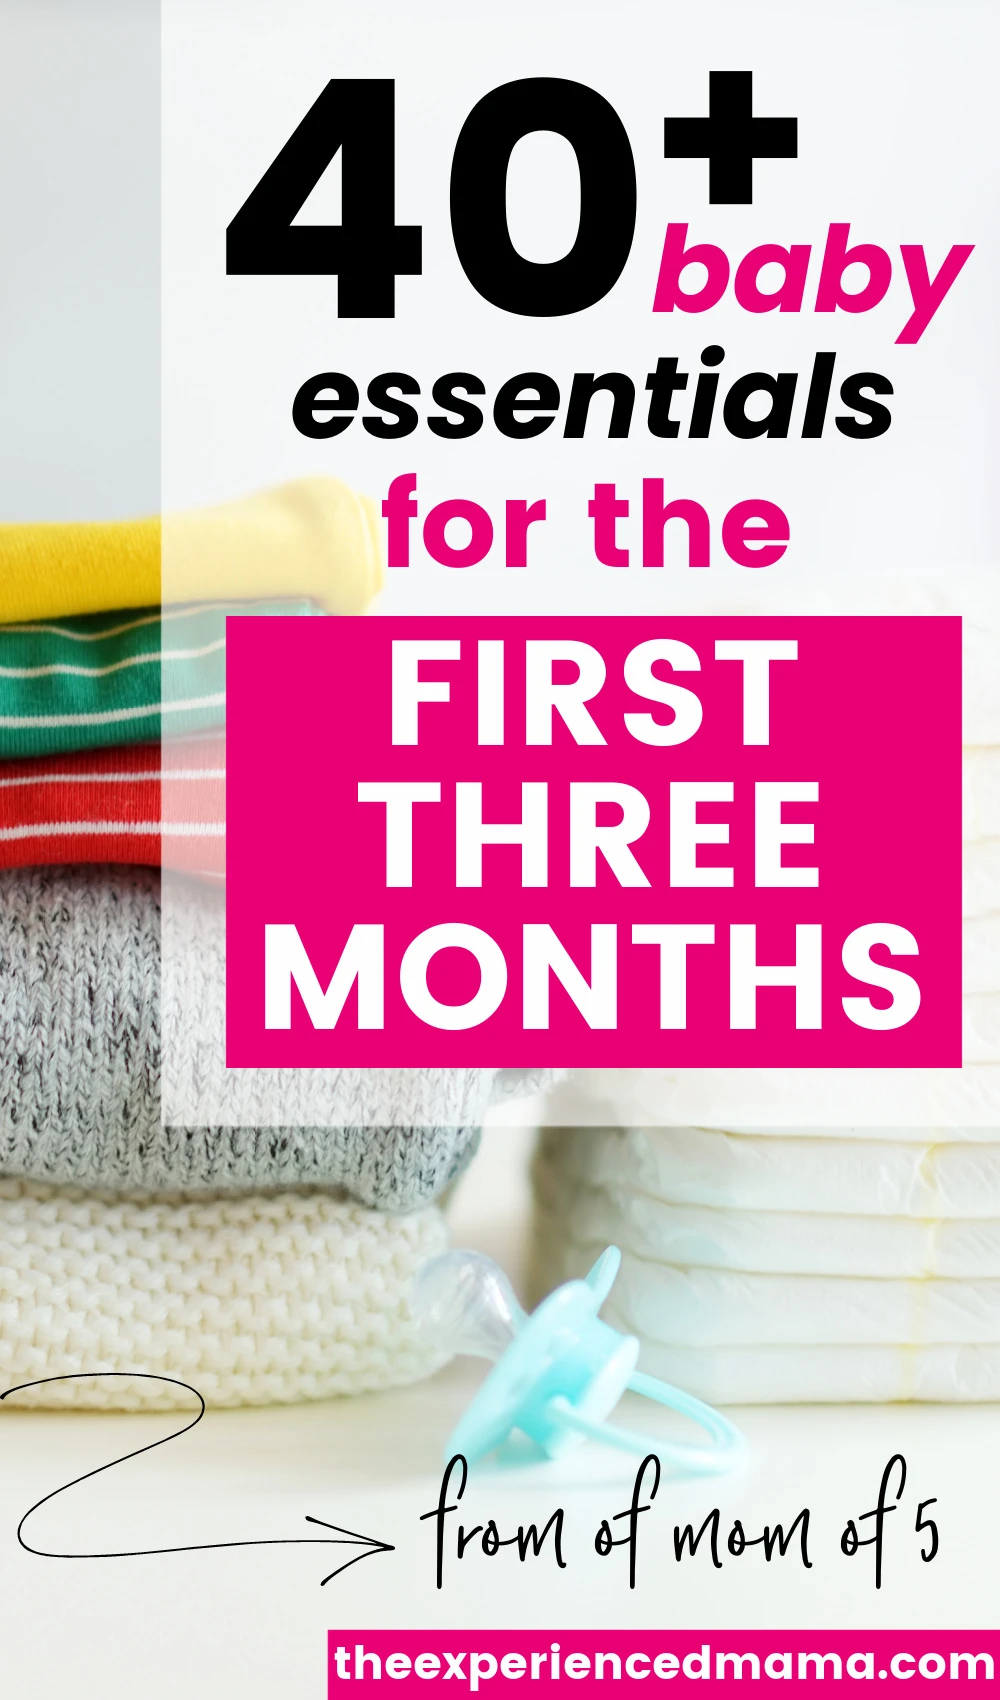 stack of colorful baby clothes, with text overlay "40+ baby essentials for the first three months".